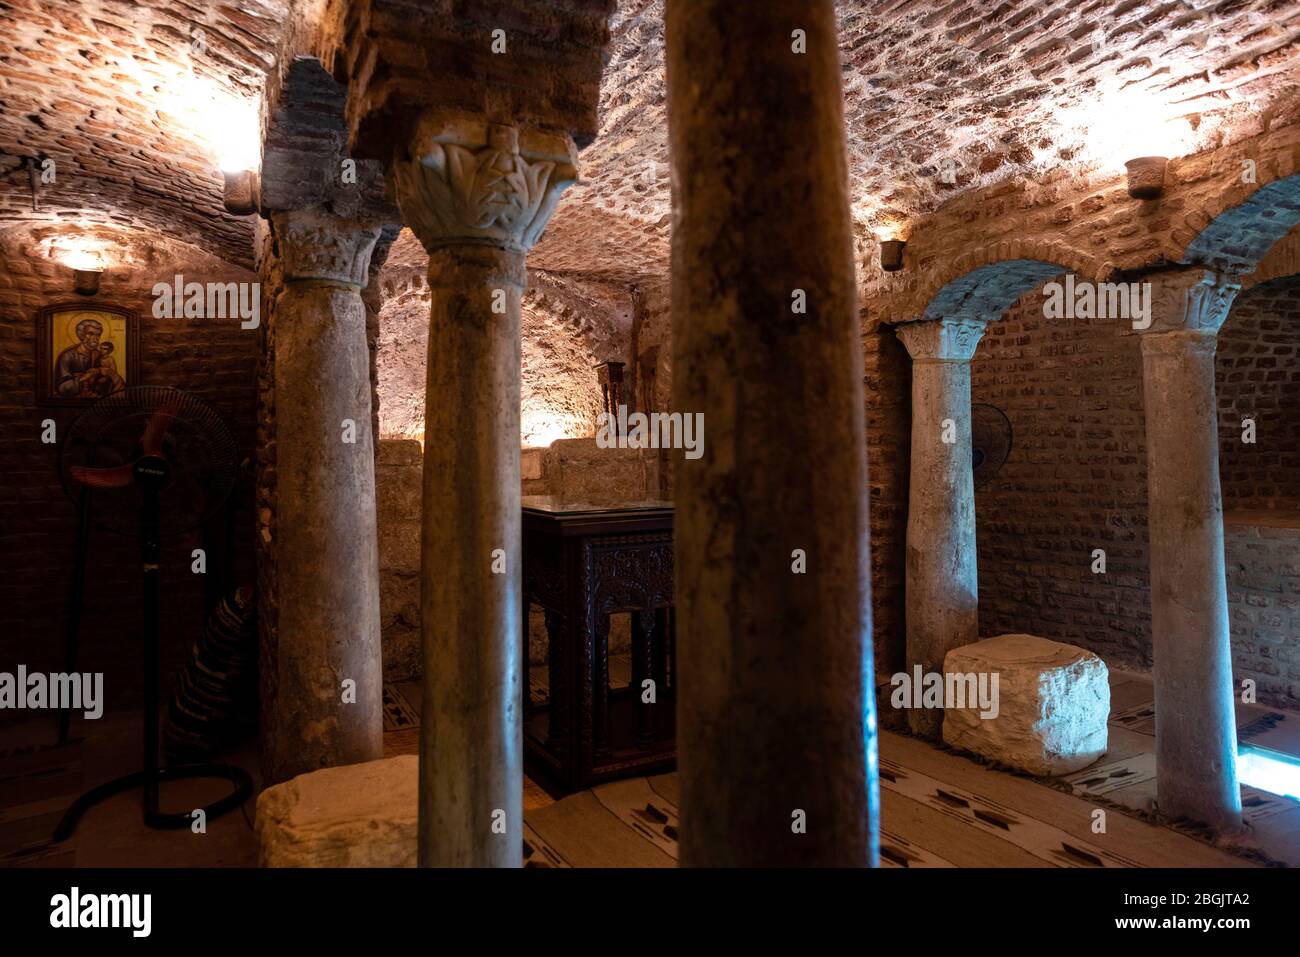 Interior view of Saints Sergius and Bacchus Church, Kom Ghorab, Old Cairo, Egypt. Stock Photo